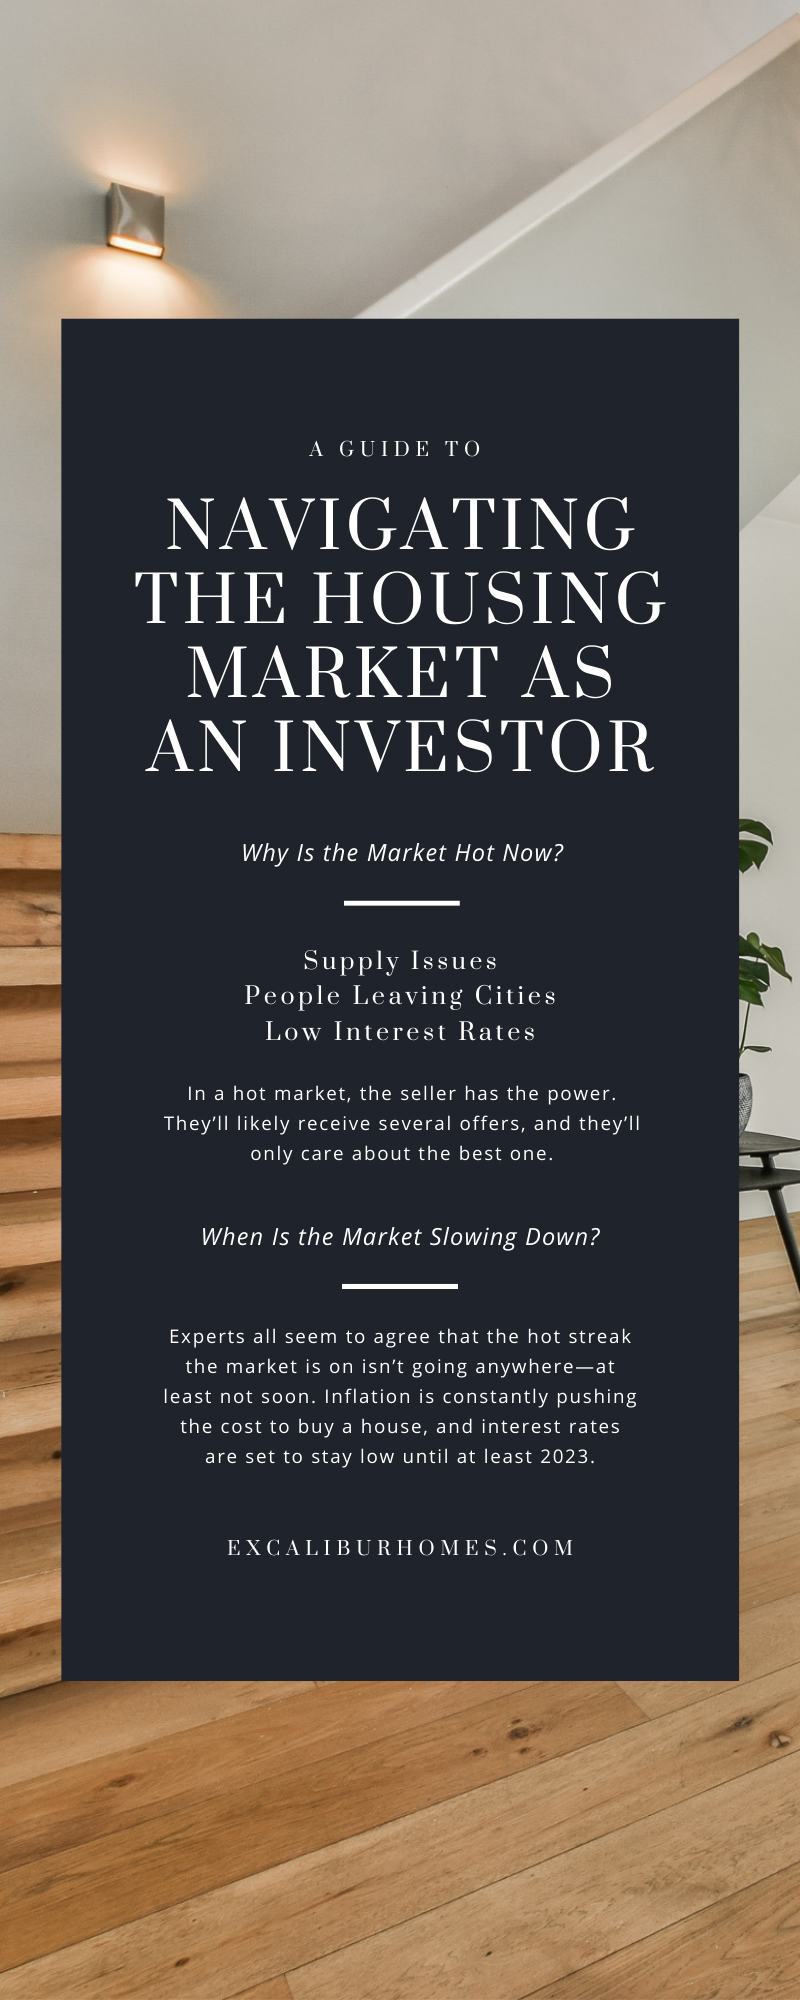 A Guide to Navigating the Housing Market as an Investor